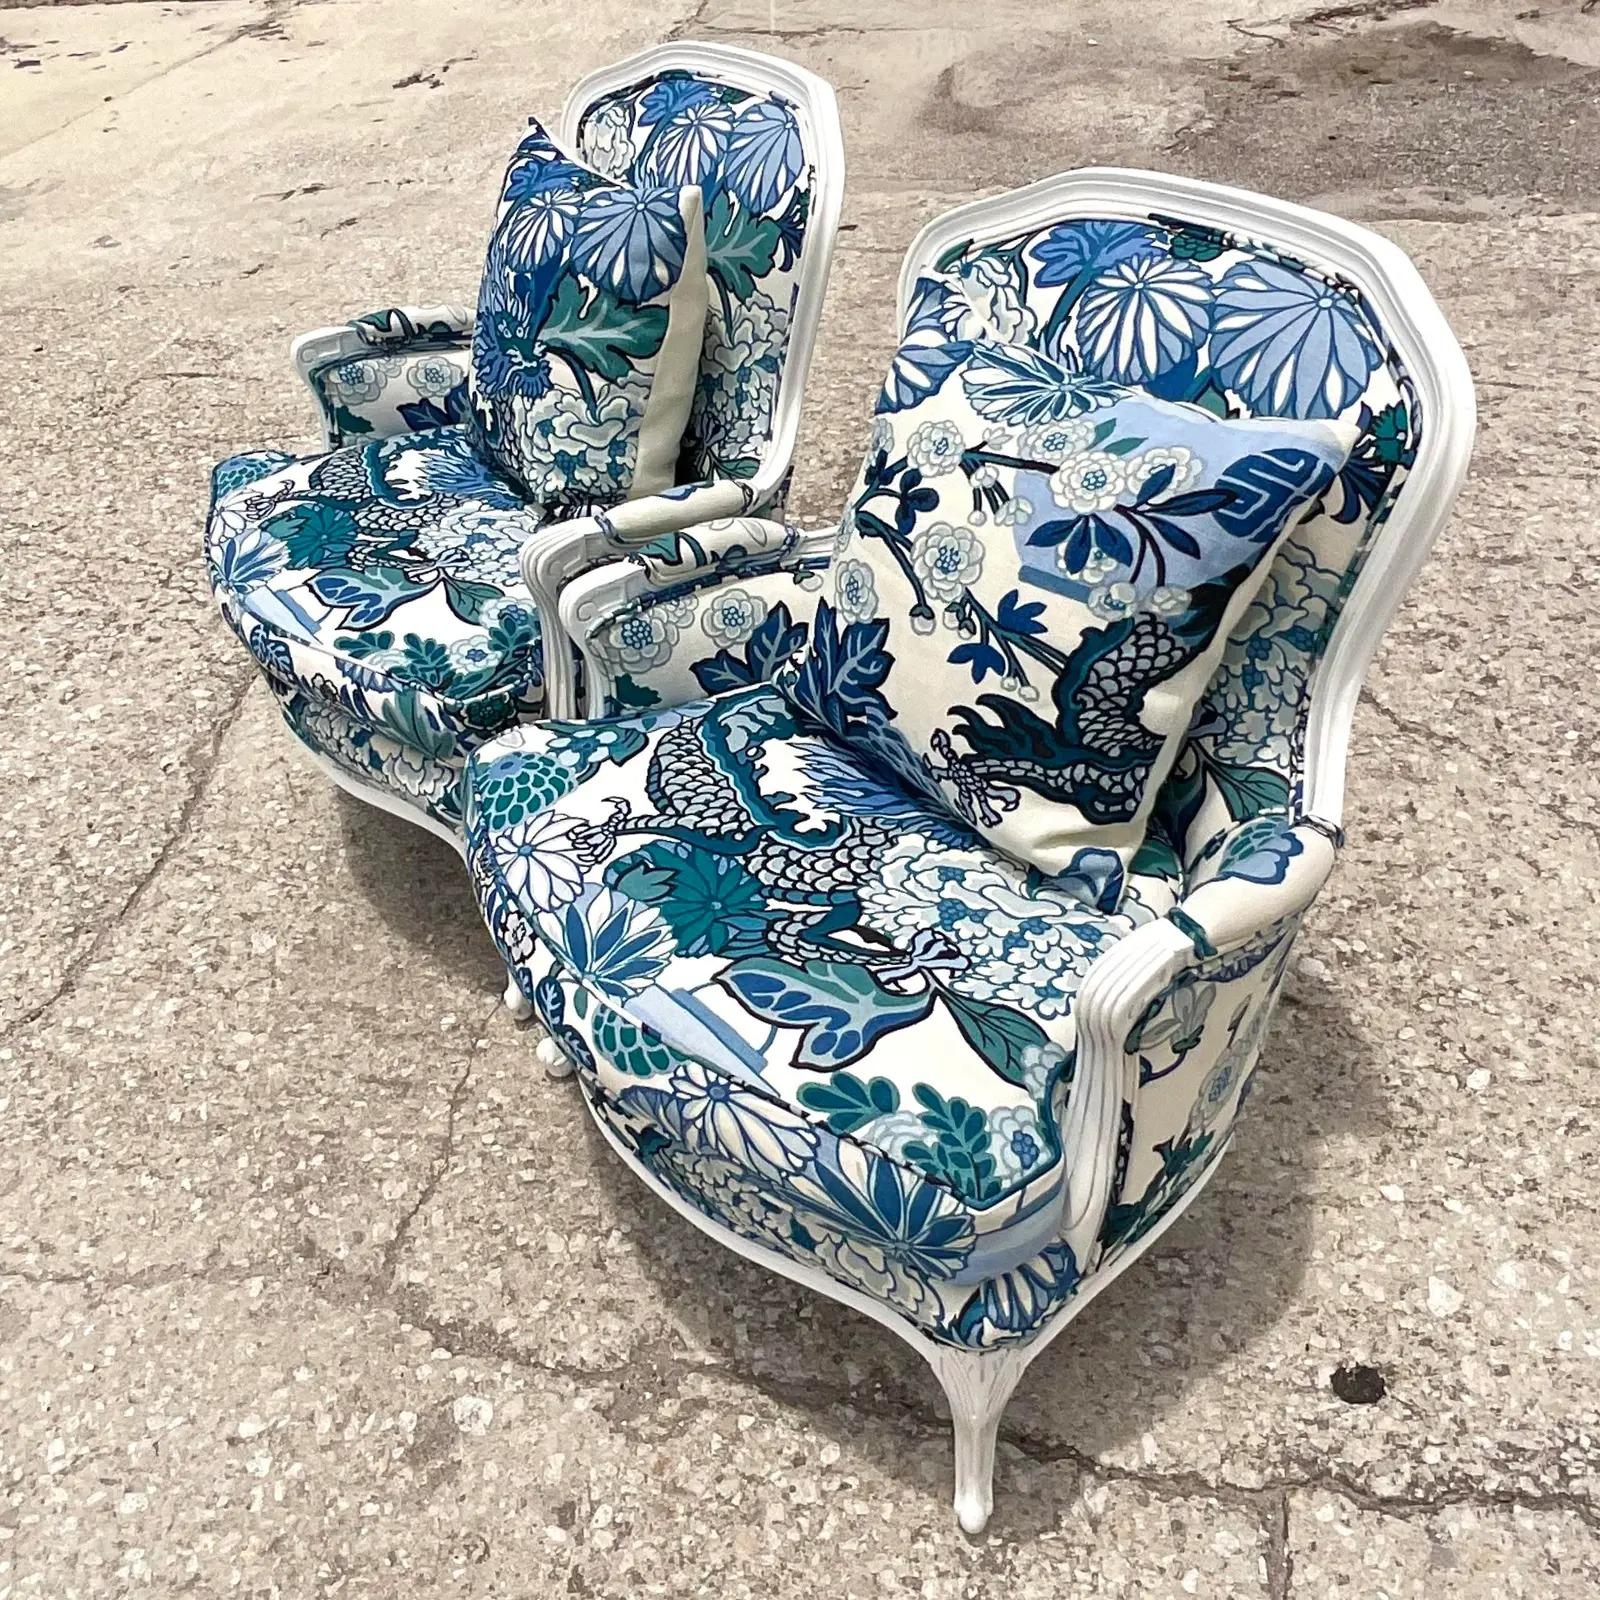 20th Century Vintage Boho Bergere Chairs in Brunschwig & Fils Dragon Print - a Pair